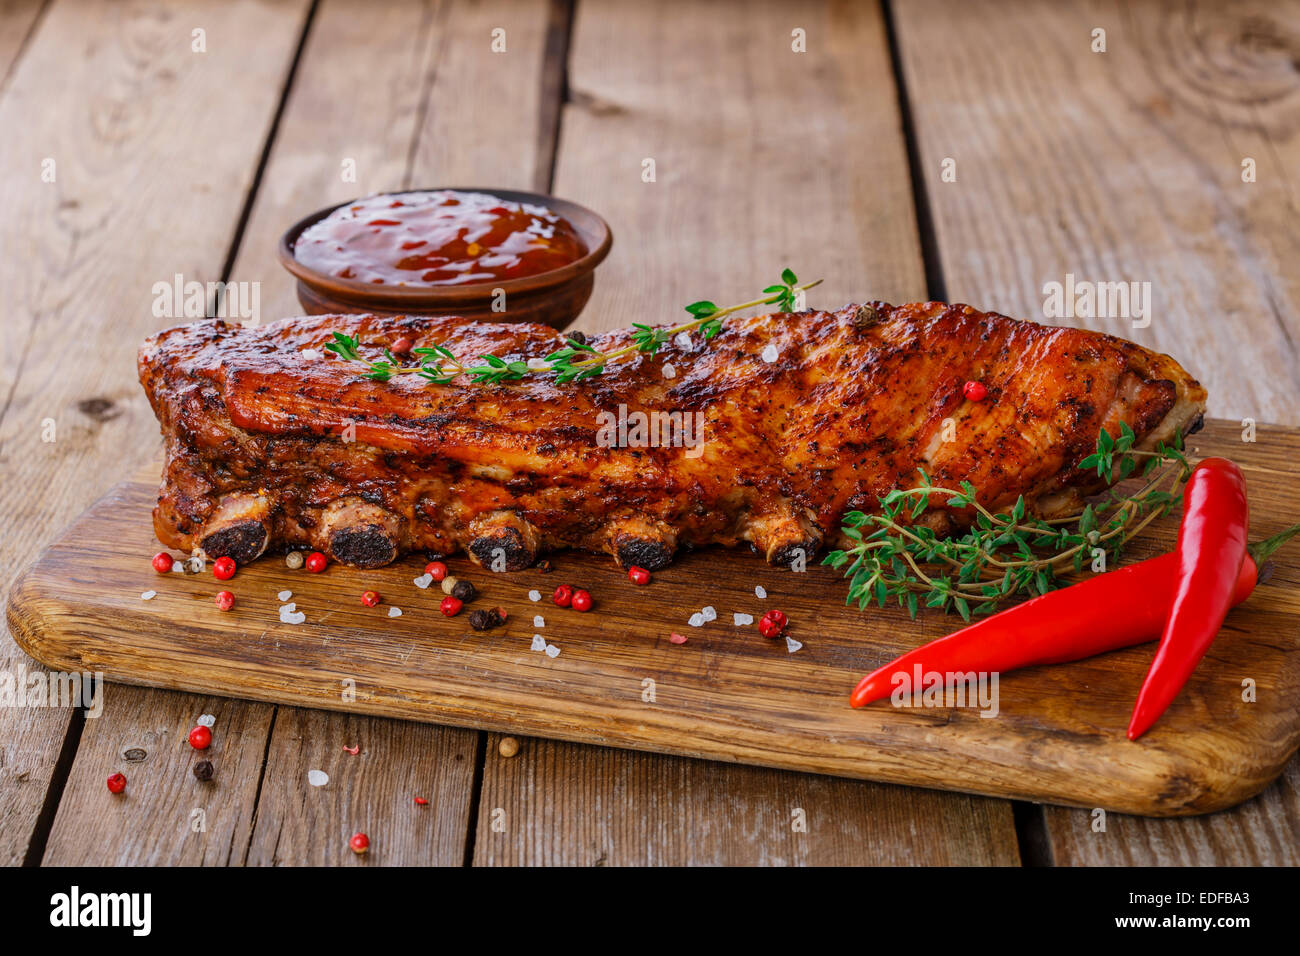 baked pork ribs on a wooden board Stock Photo